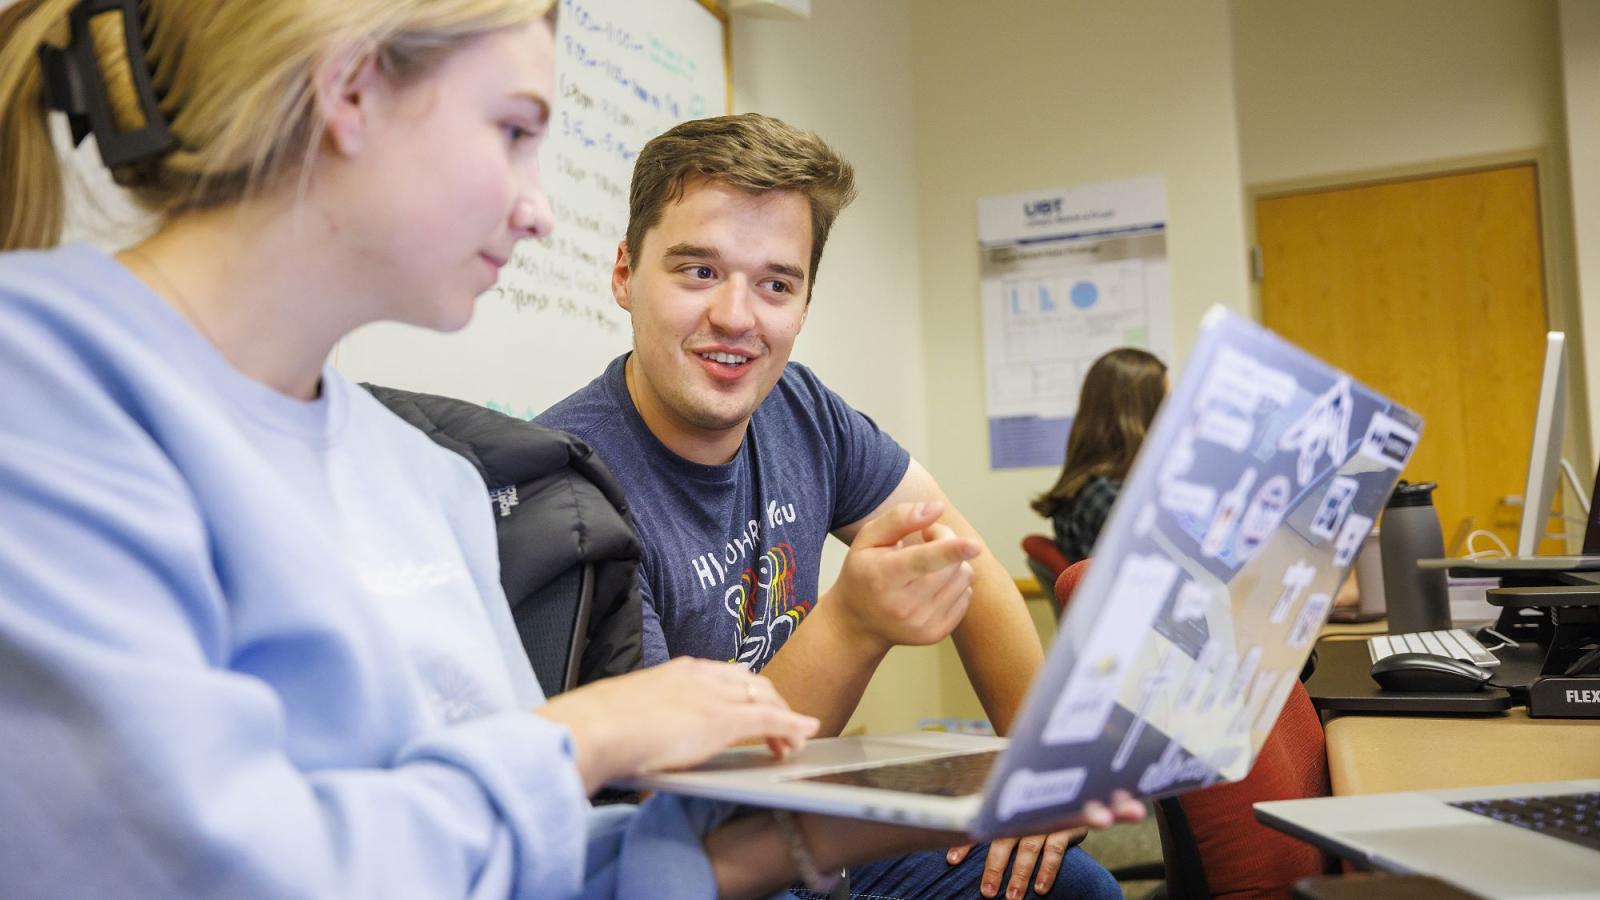 A smiling student points to a screen while talking with another student.